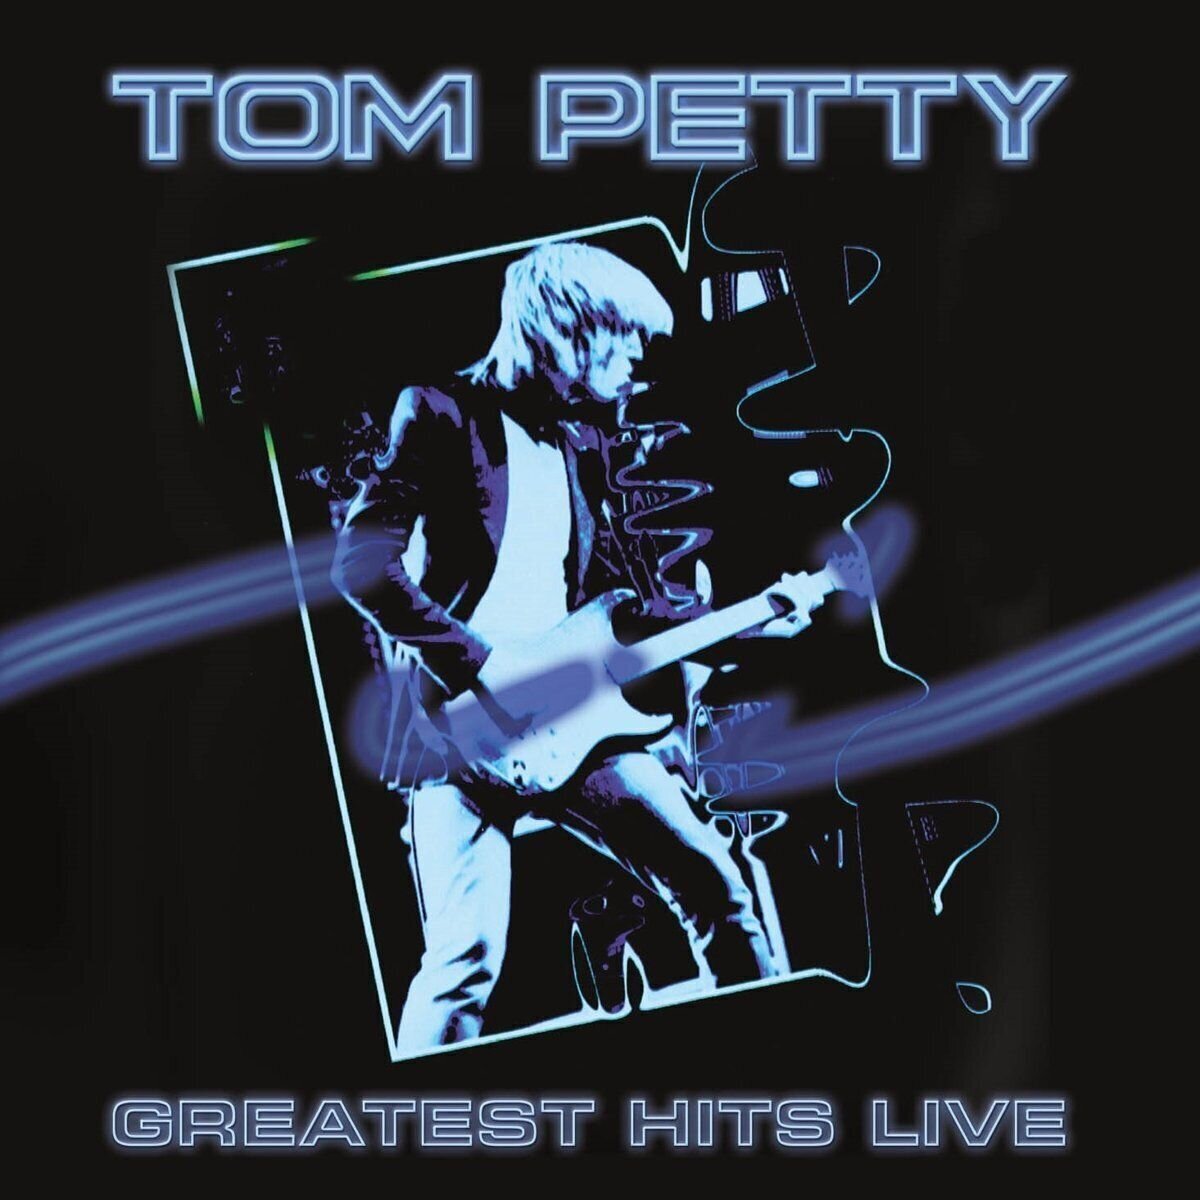 LP Tom Petty - Greatest Hits Live (Limited Edition) (Picture Disc (LP)